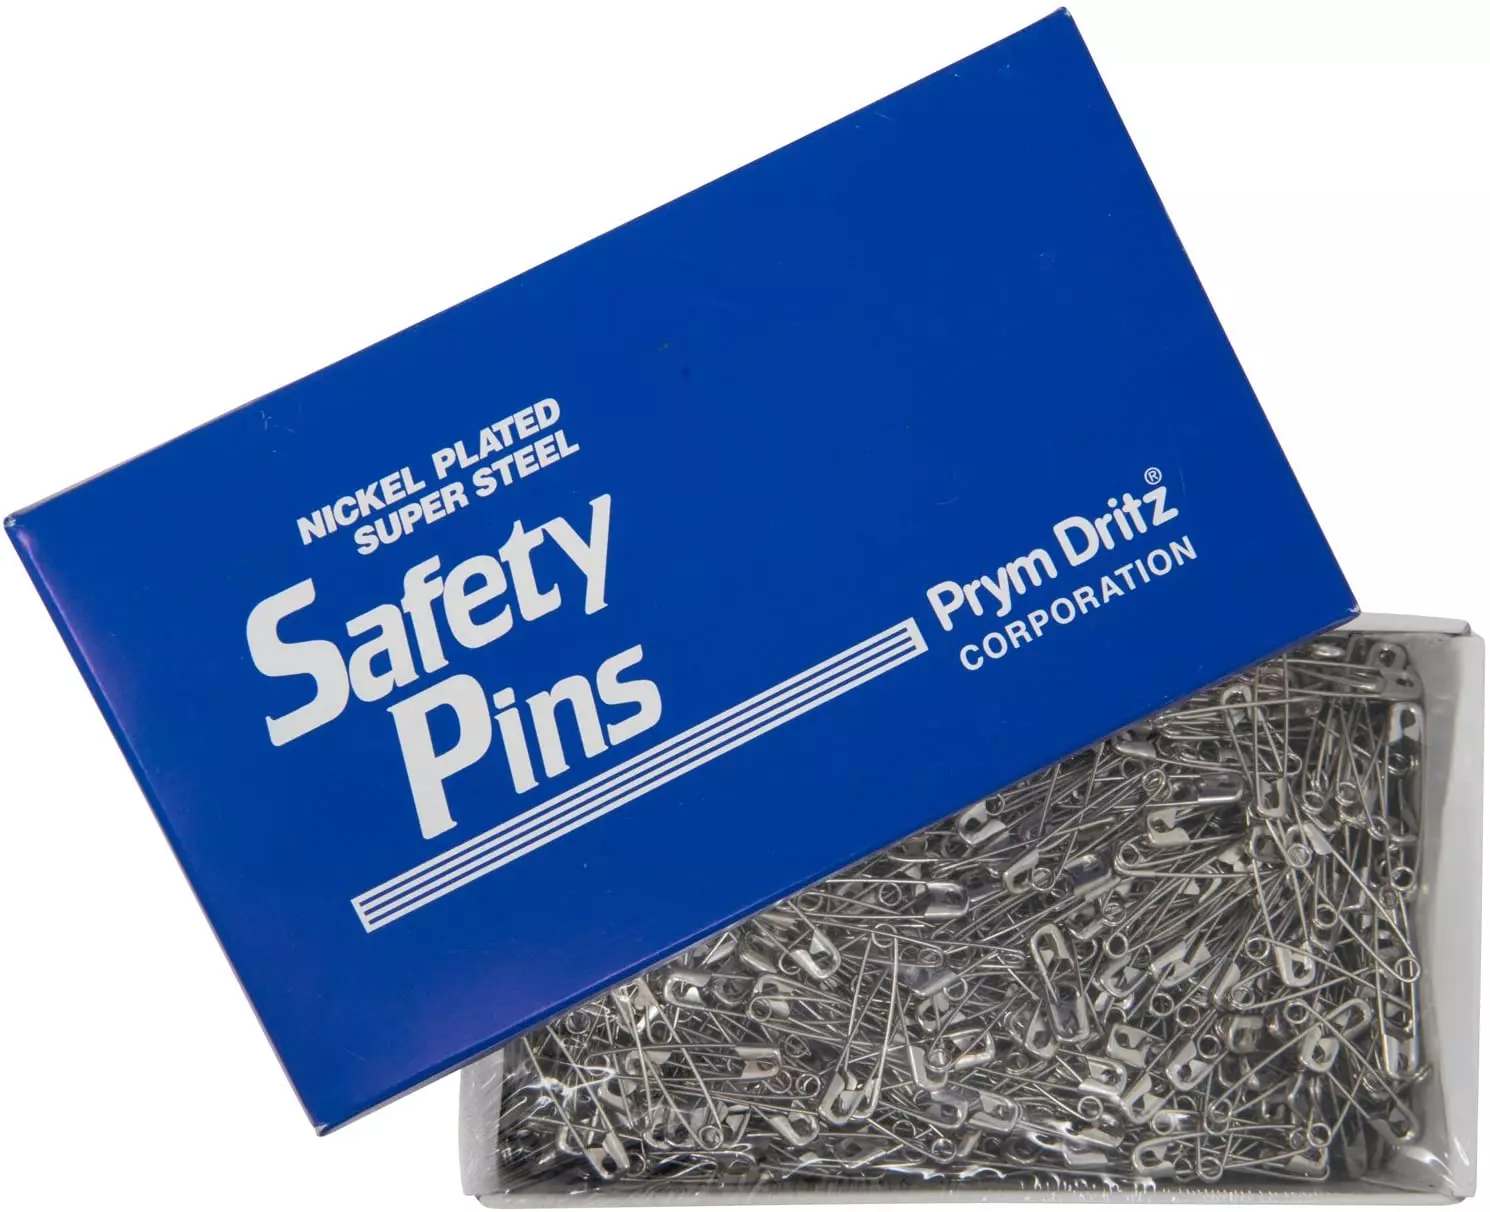 Supreme X-3-SC - Safety Pins # 3, (10 Gross, 1440 PIECES)